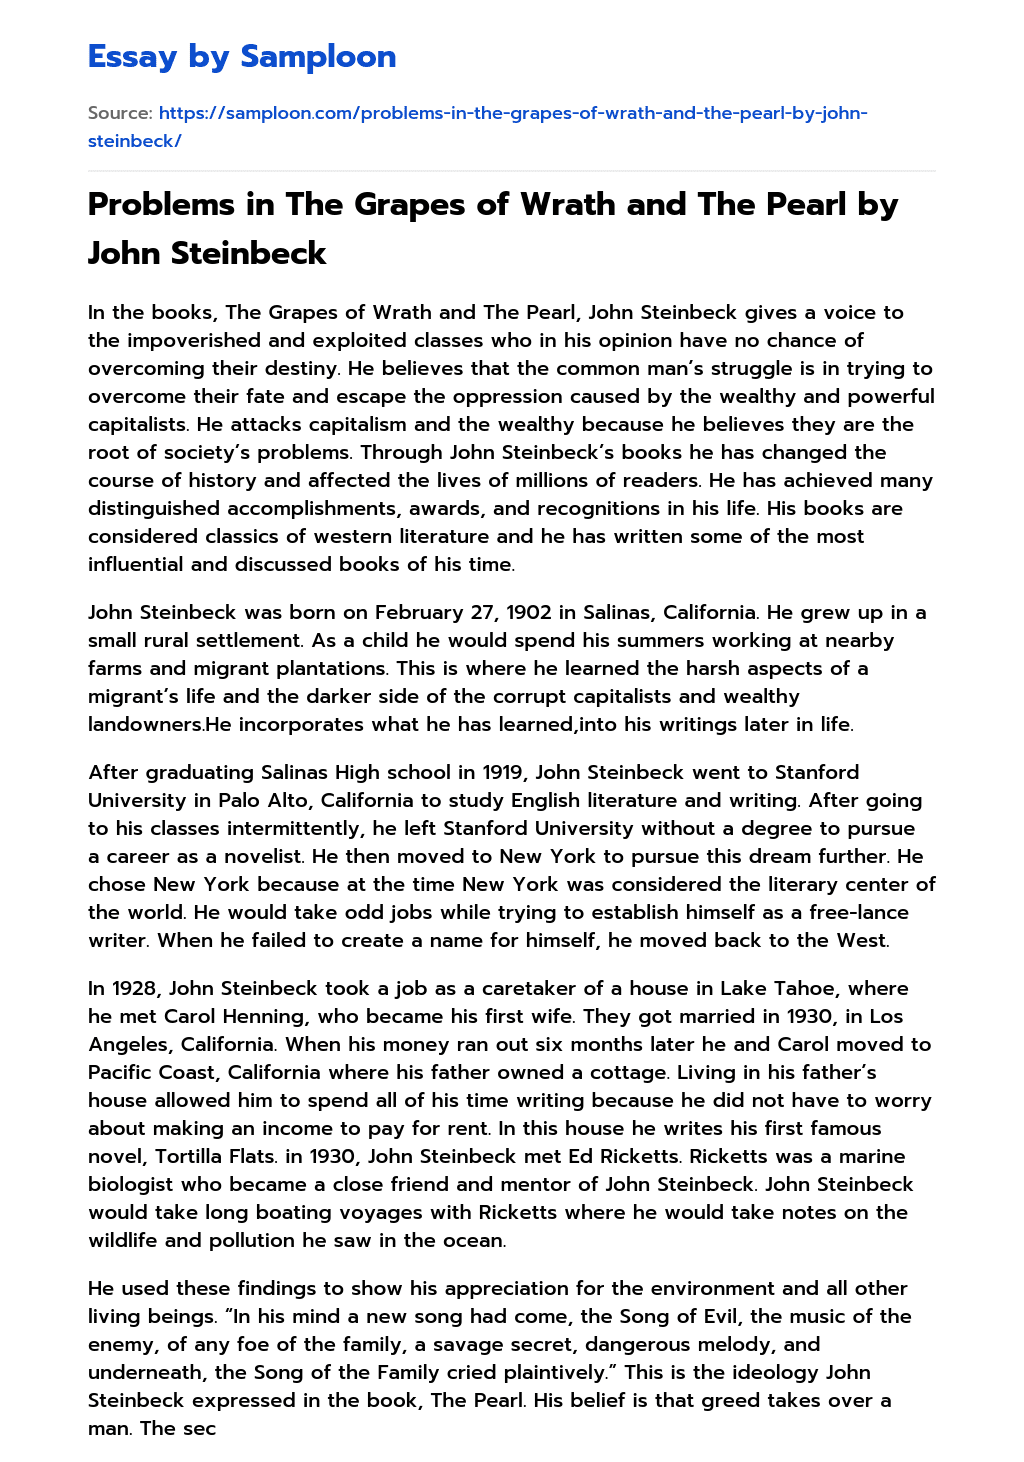 Problems in The Grapes of Wrath and The Pearl by John Steinbeck Summary essay